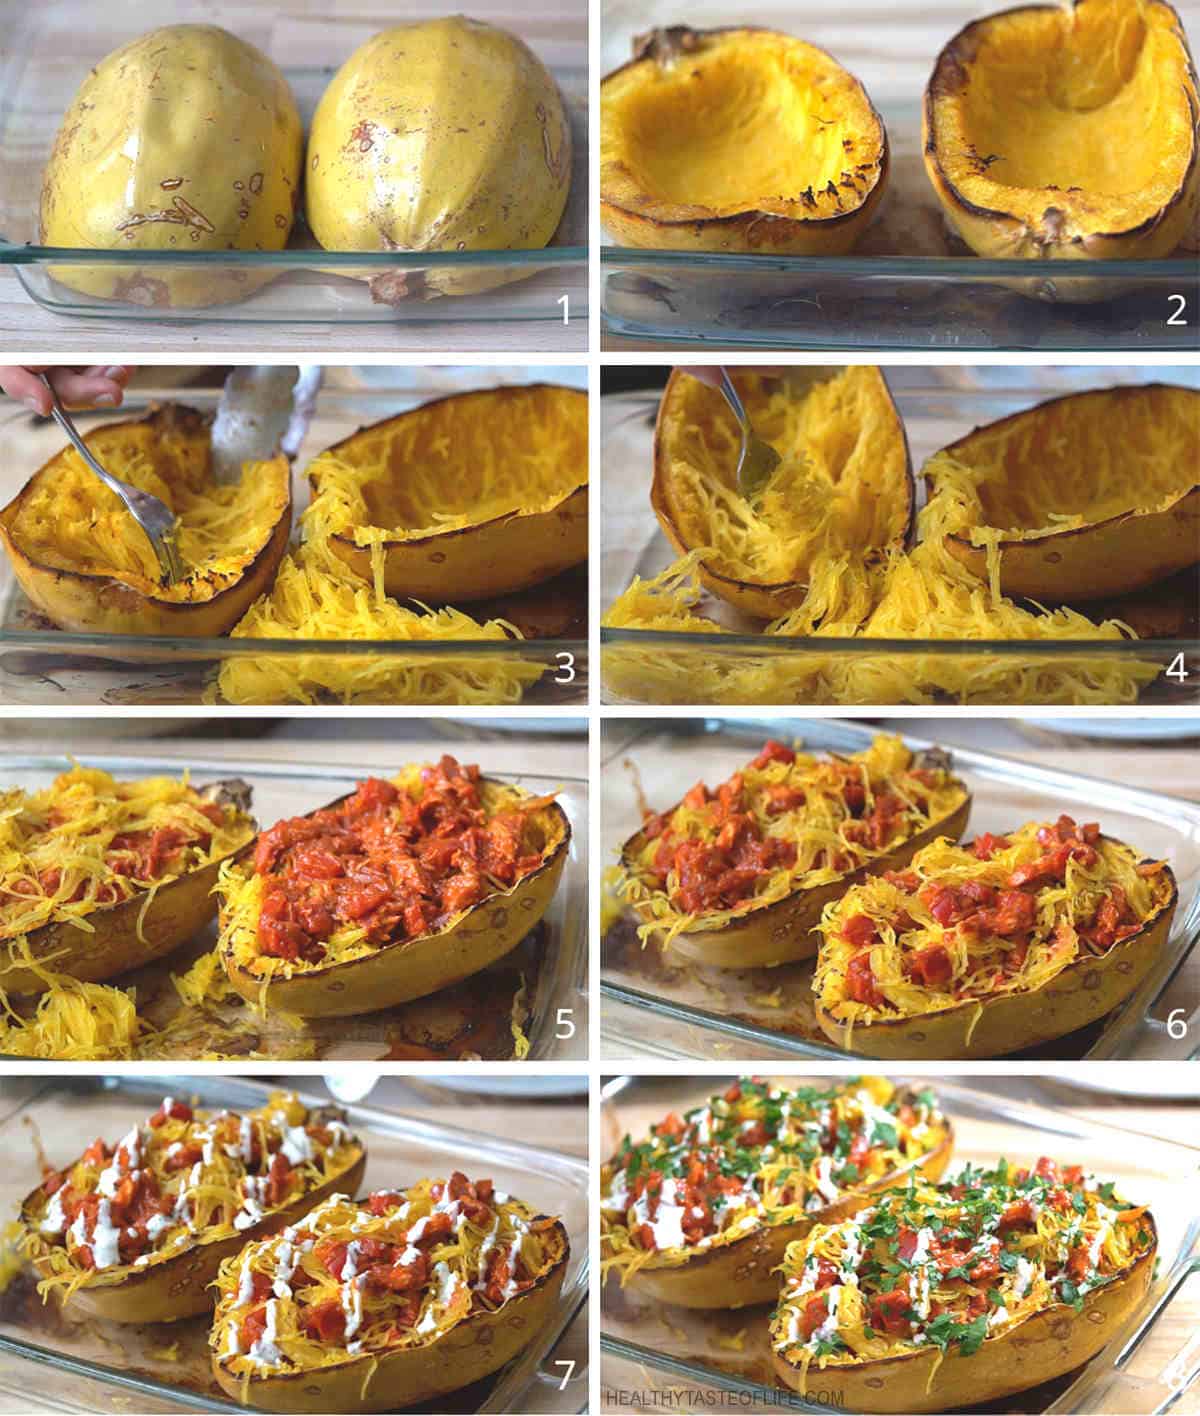 How To Make Healthy Spaghetti Squash Boats Stuffed With BBQ Chicken